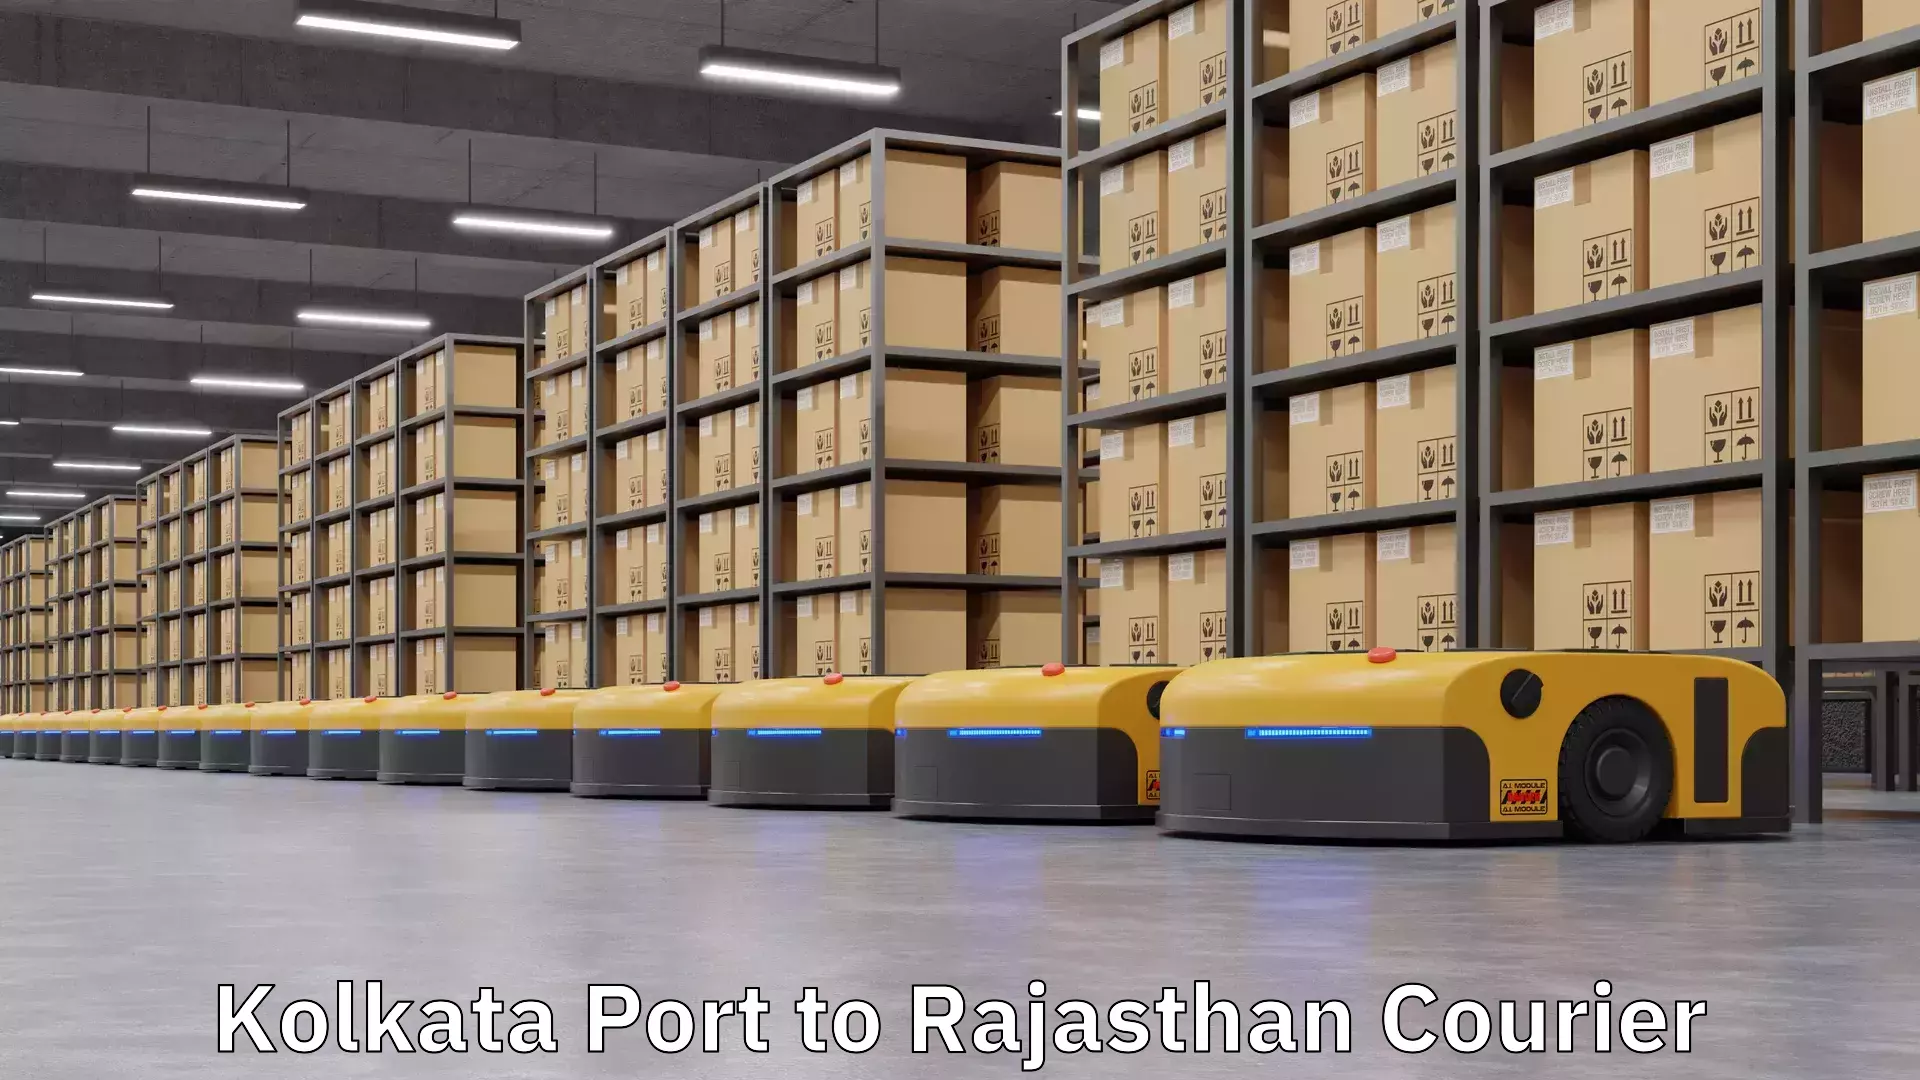 Flexible delivery scheduling Kolkata Port to Rajasthan